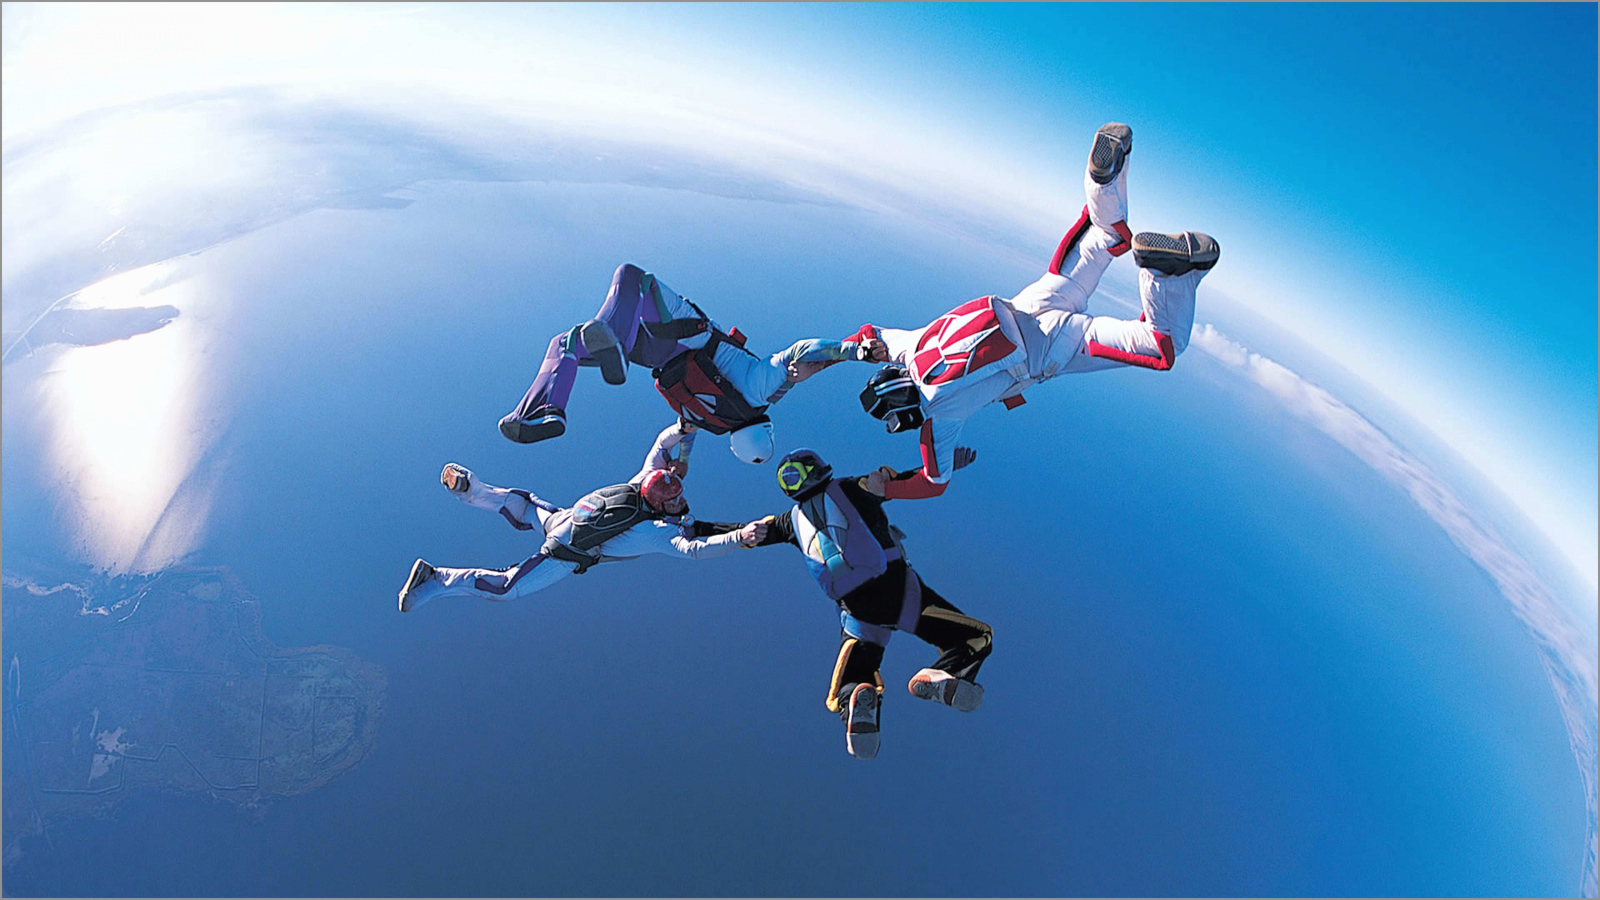 Four skydivers in the air